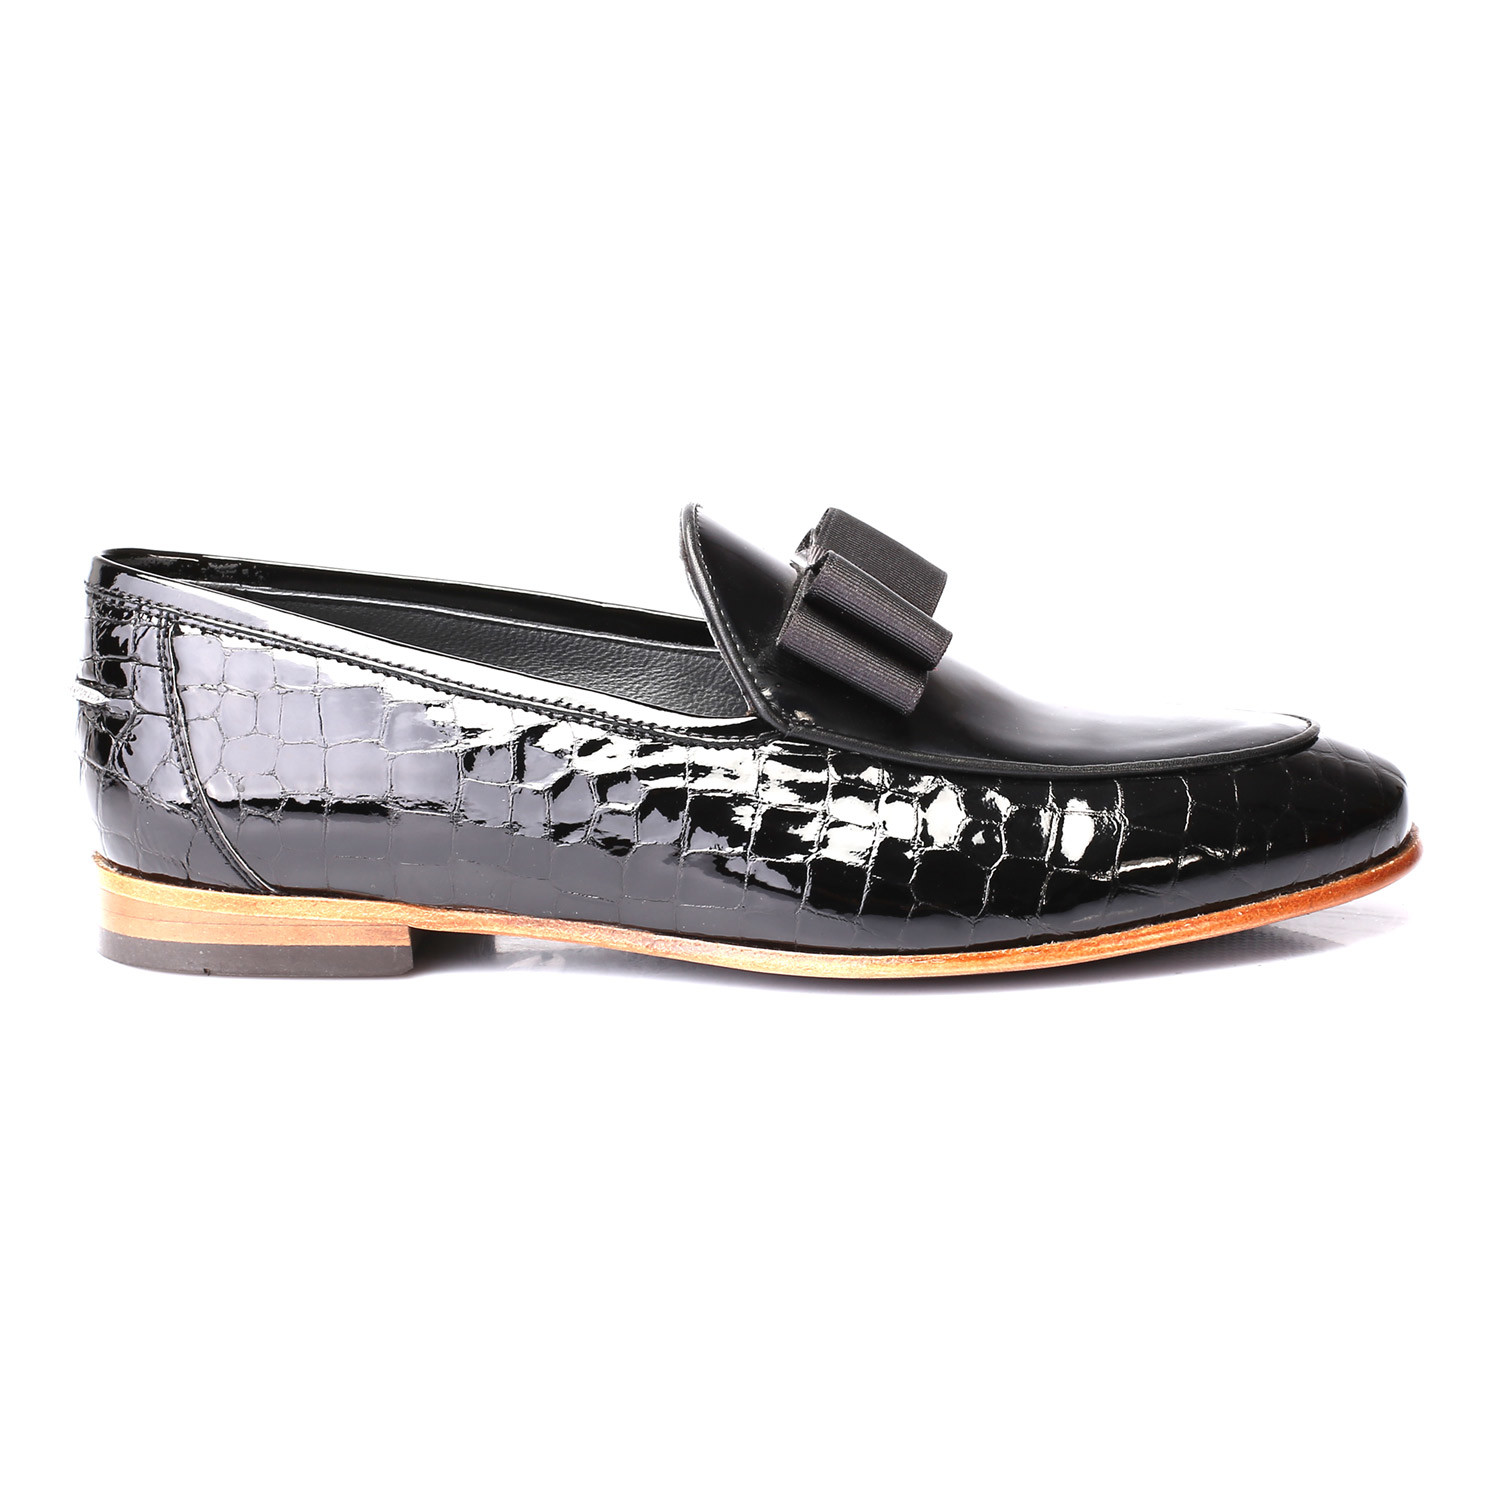 Patent Croc Embossed Piped Ribbon Loafer // Black (Euro: 39) - S. Baker ...